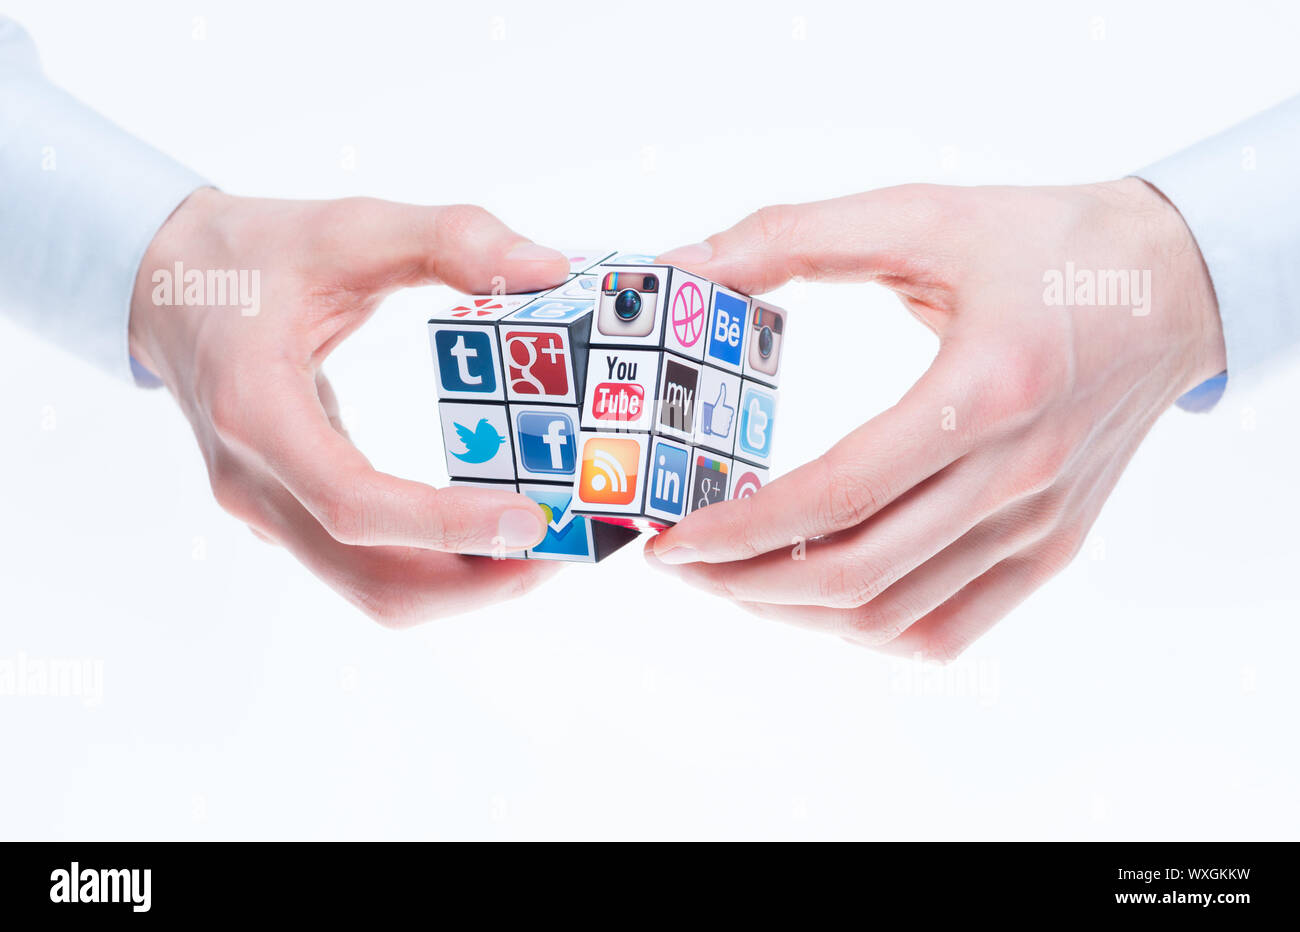 Social networking concept Stock Photo